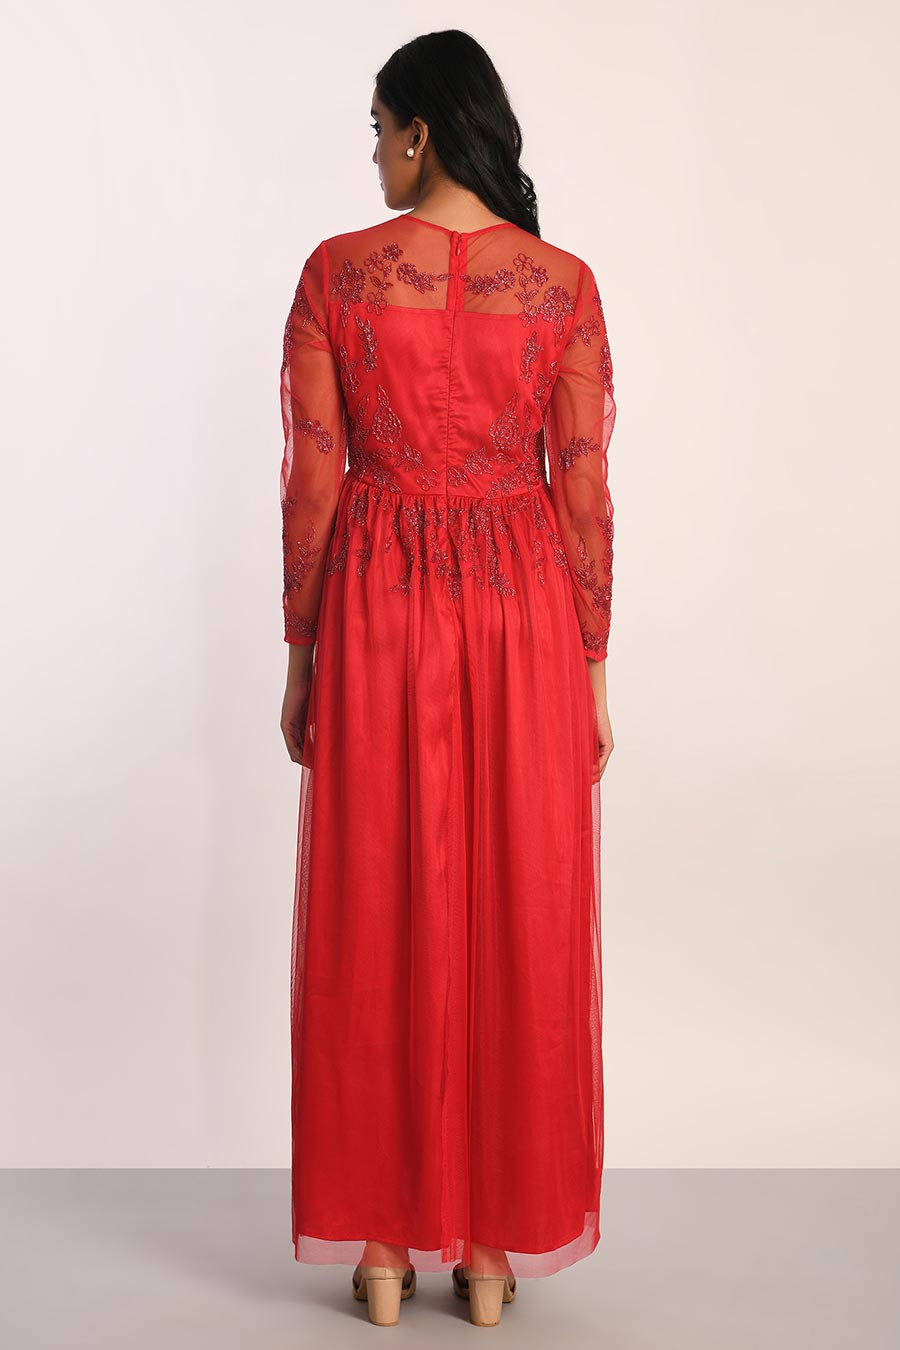 Scarlett Red Embroidered Gown Dress